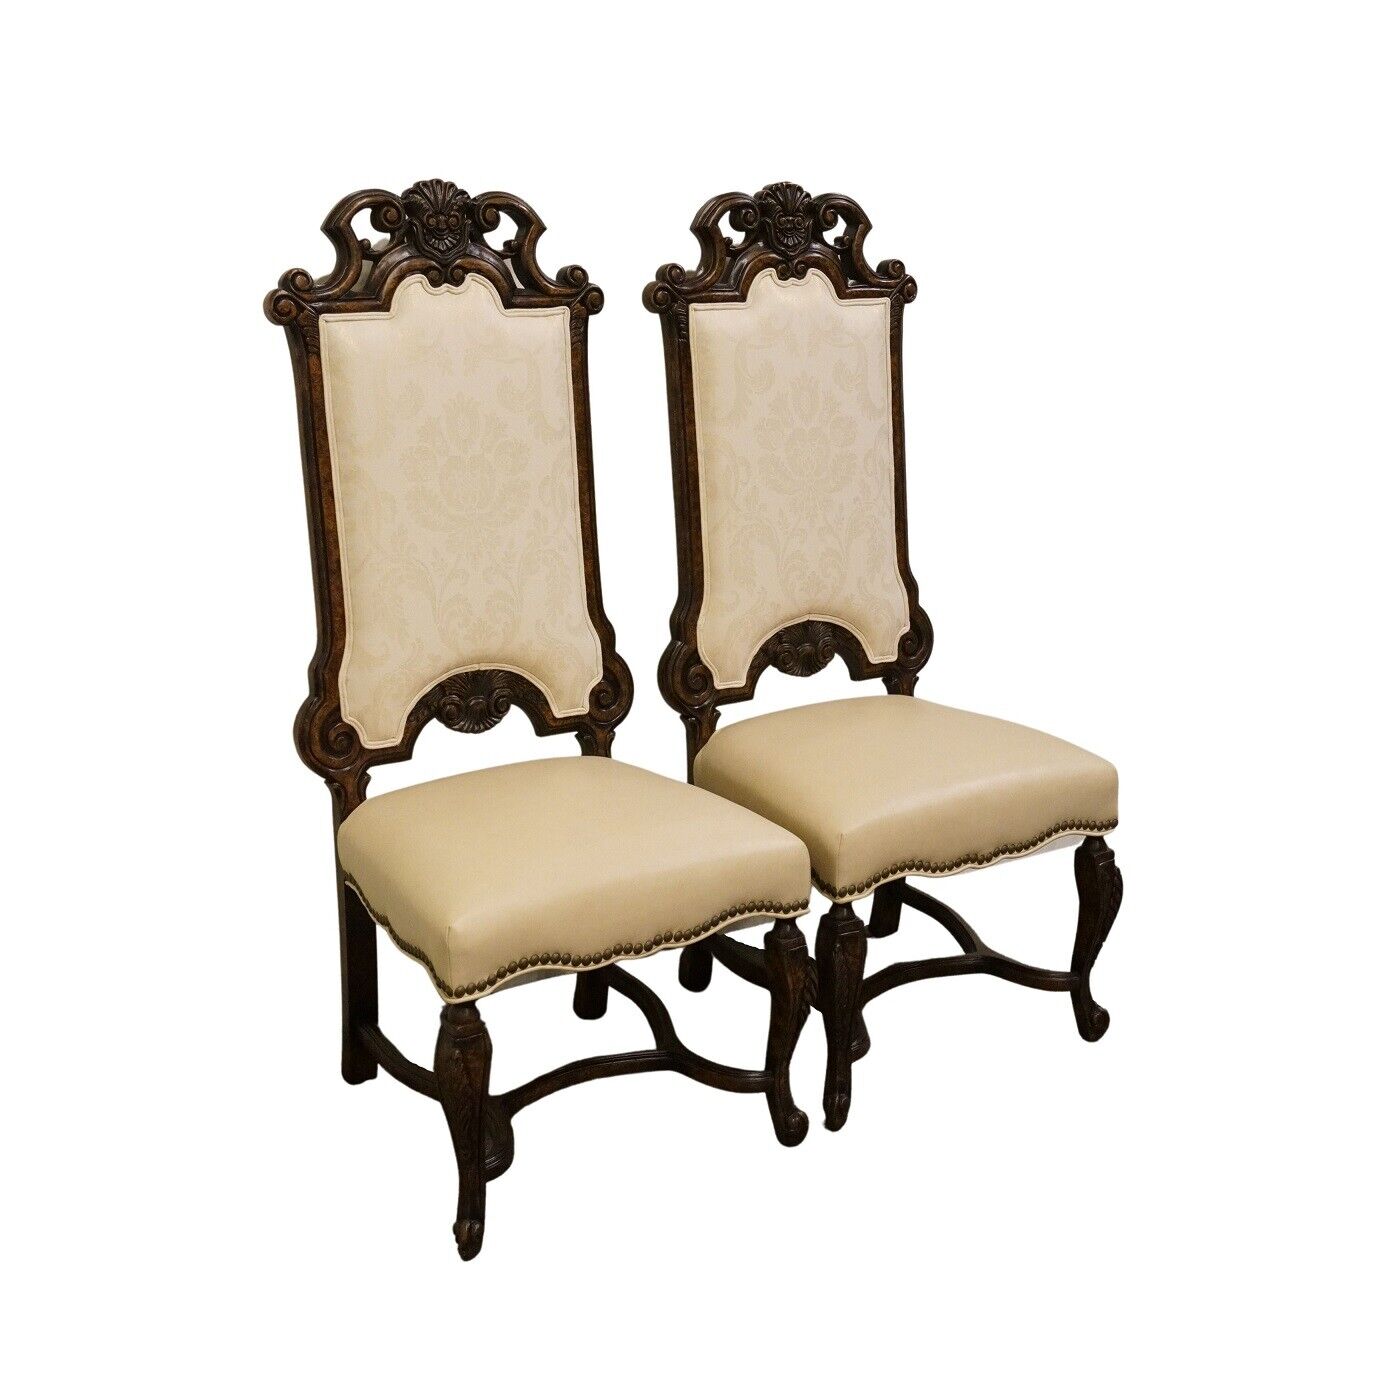 Set of 2 TOMLINSON ERWIN LAMBETH Louis XVI French Accent / Dining Side Chairs